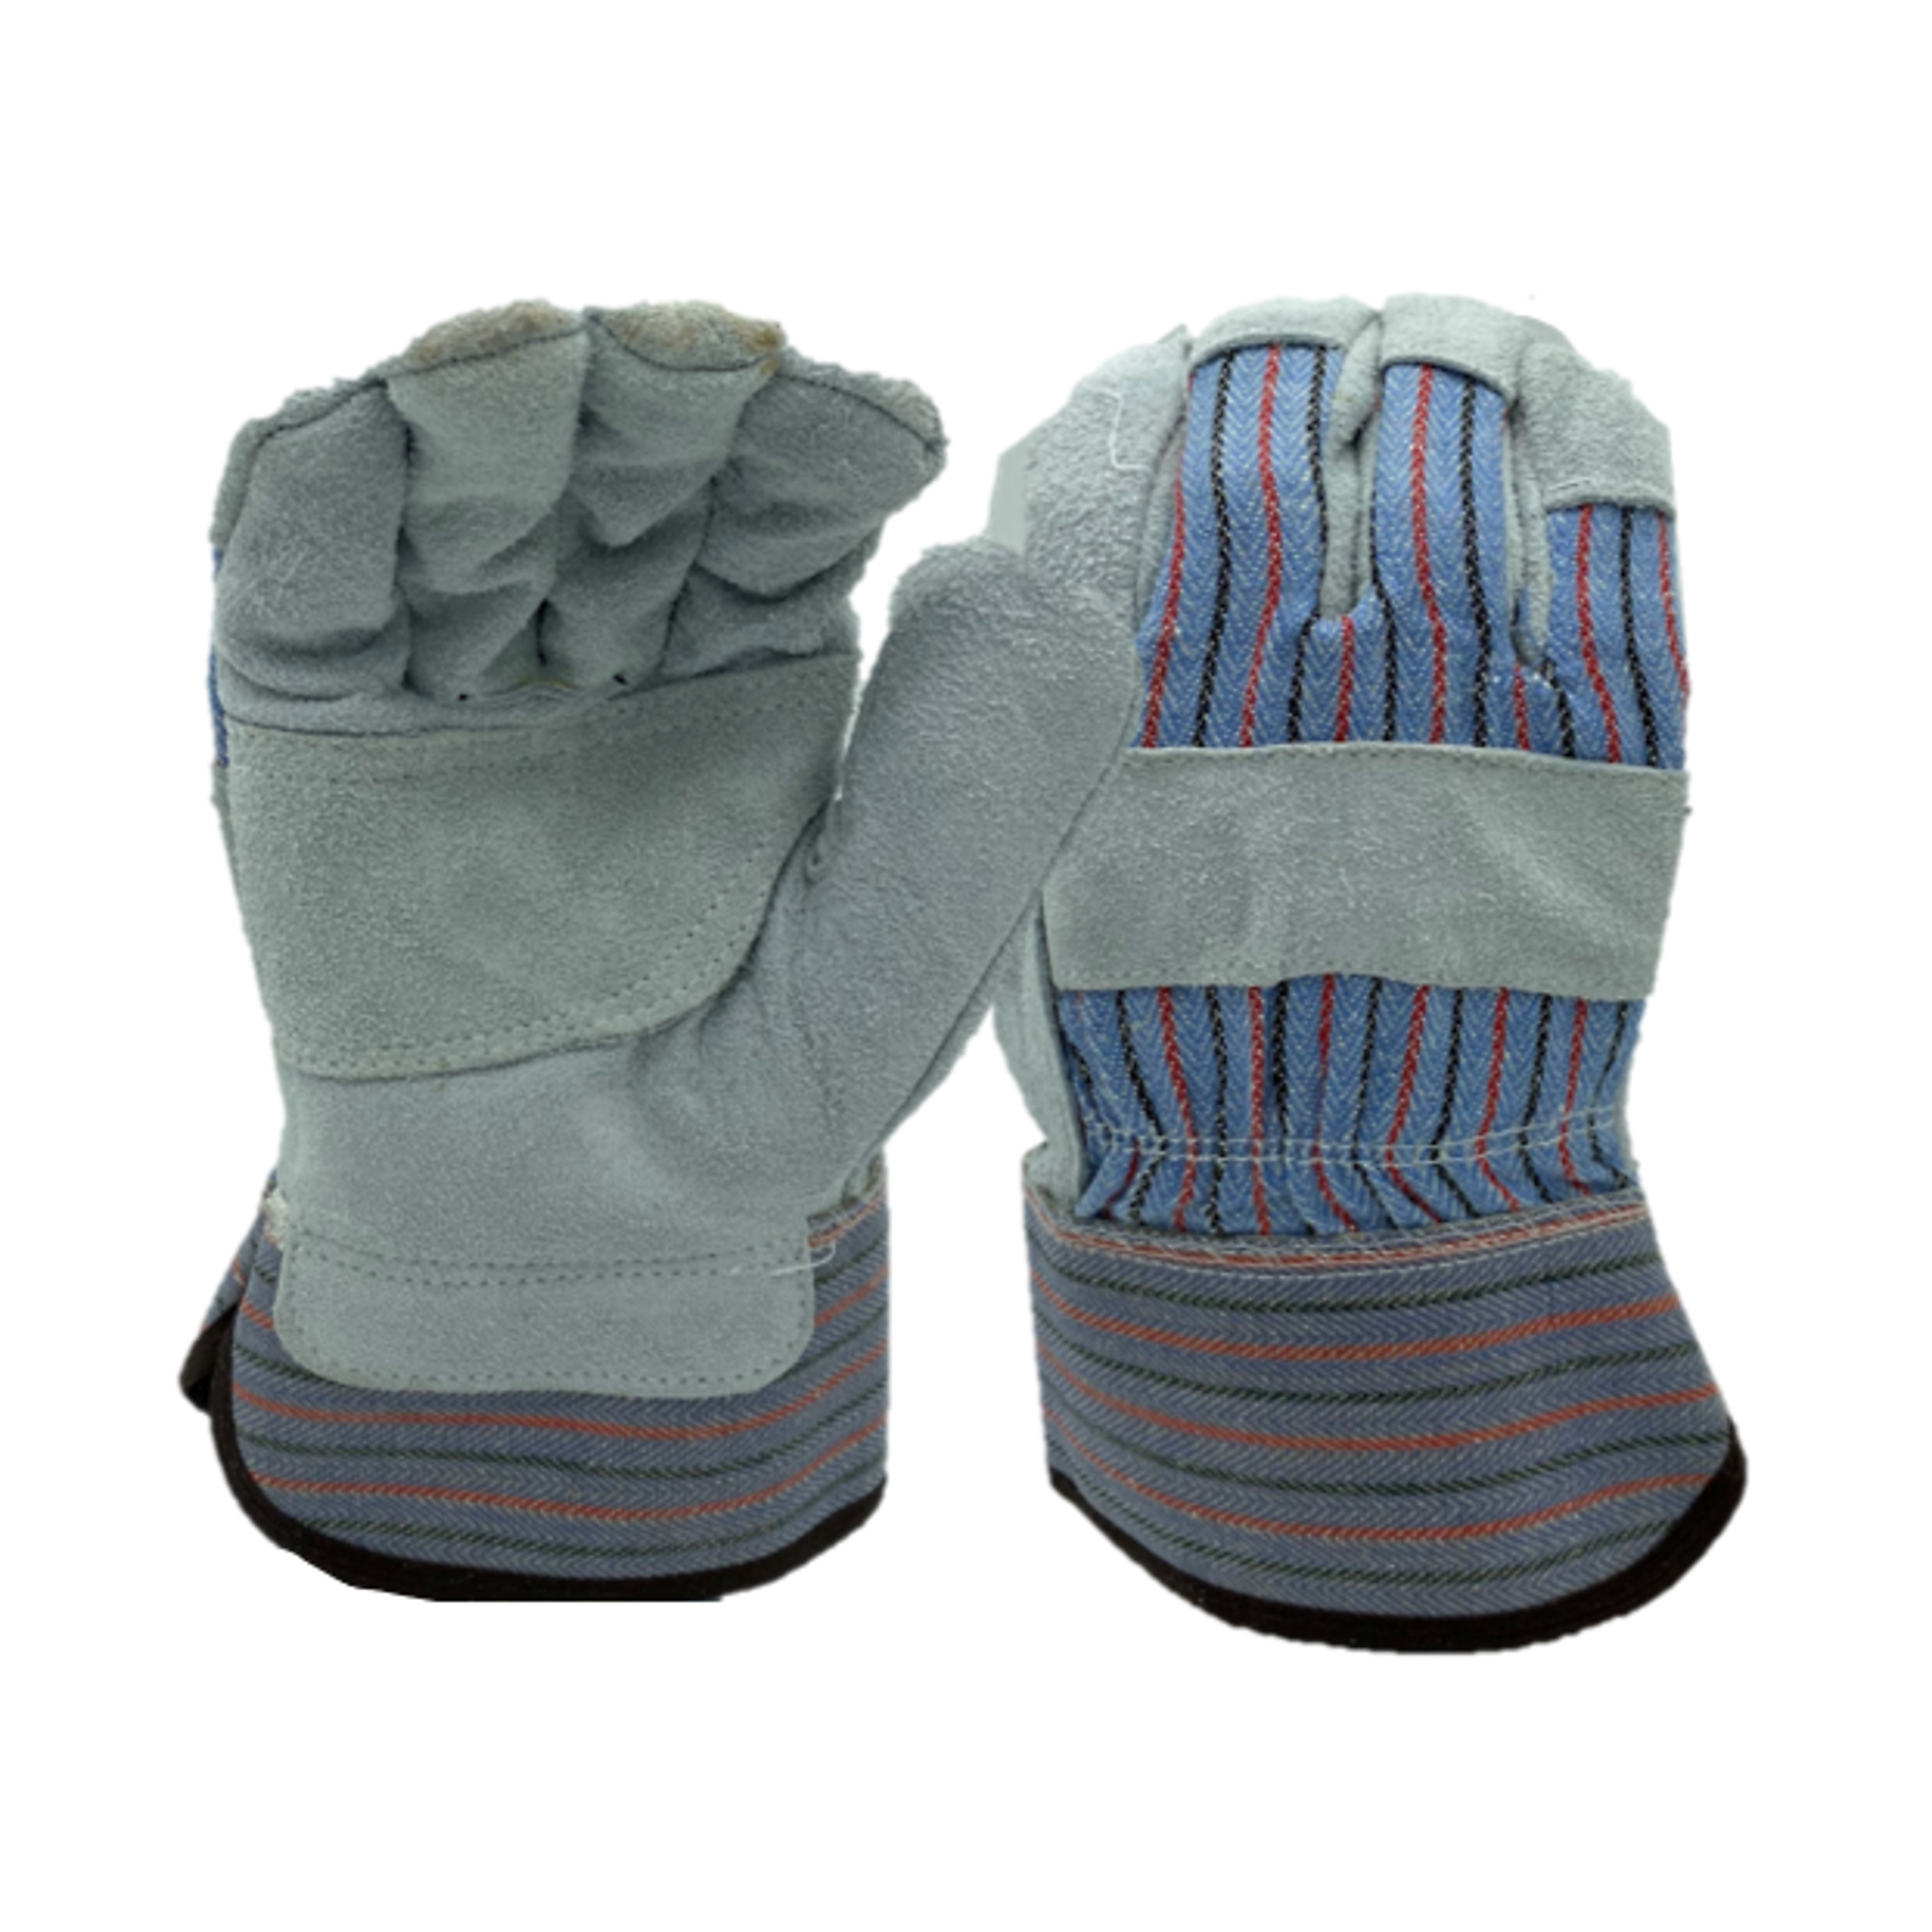 Boss, Standard Grade Leather Palm 3-Pack, Size L, Color Gray, Included (qty.) 3, Model 4094-3